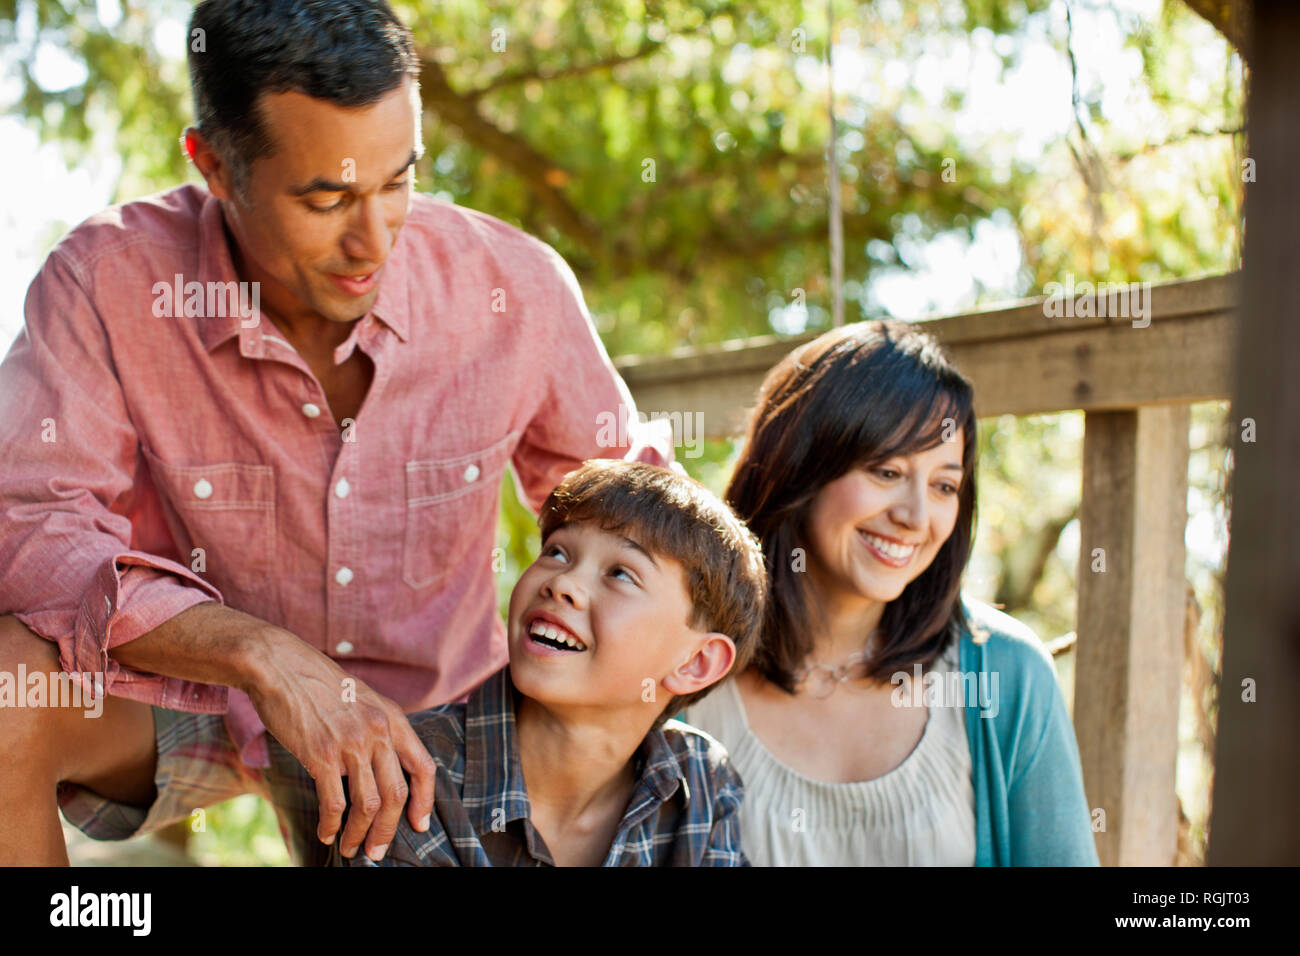 Smiling father and son looking at one another. Stock Photo